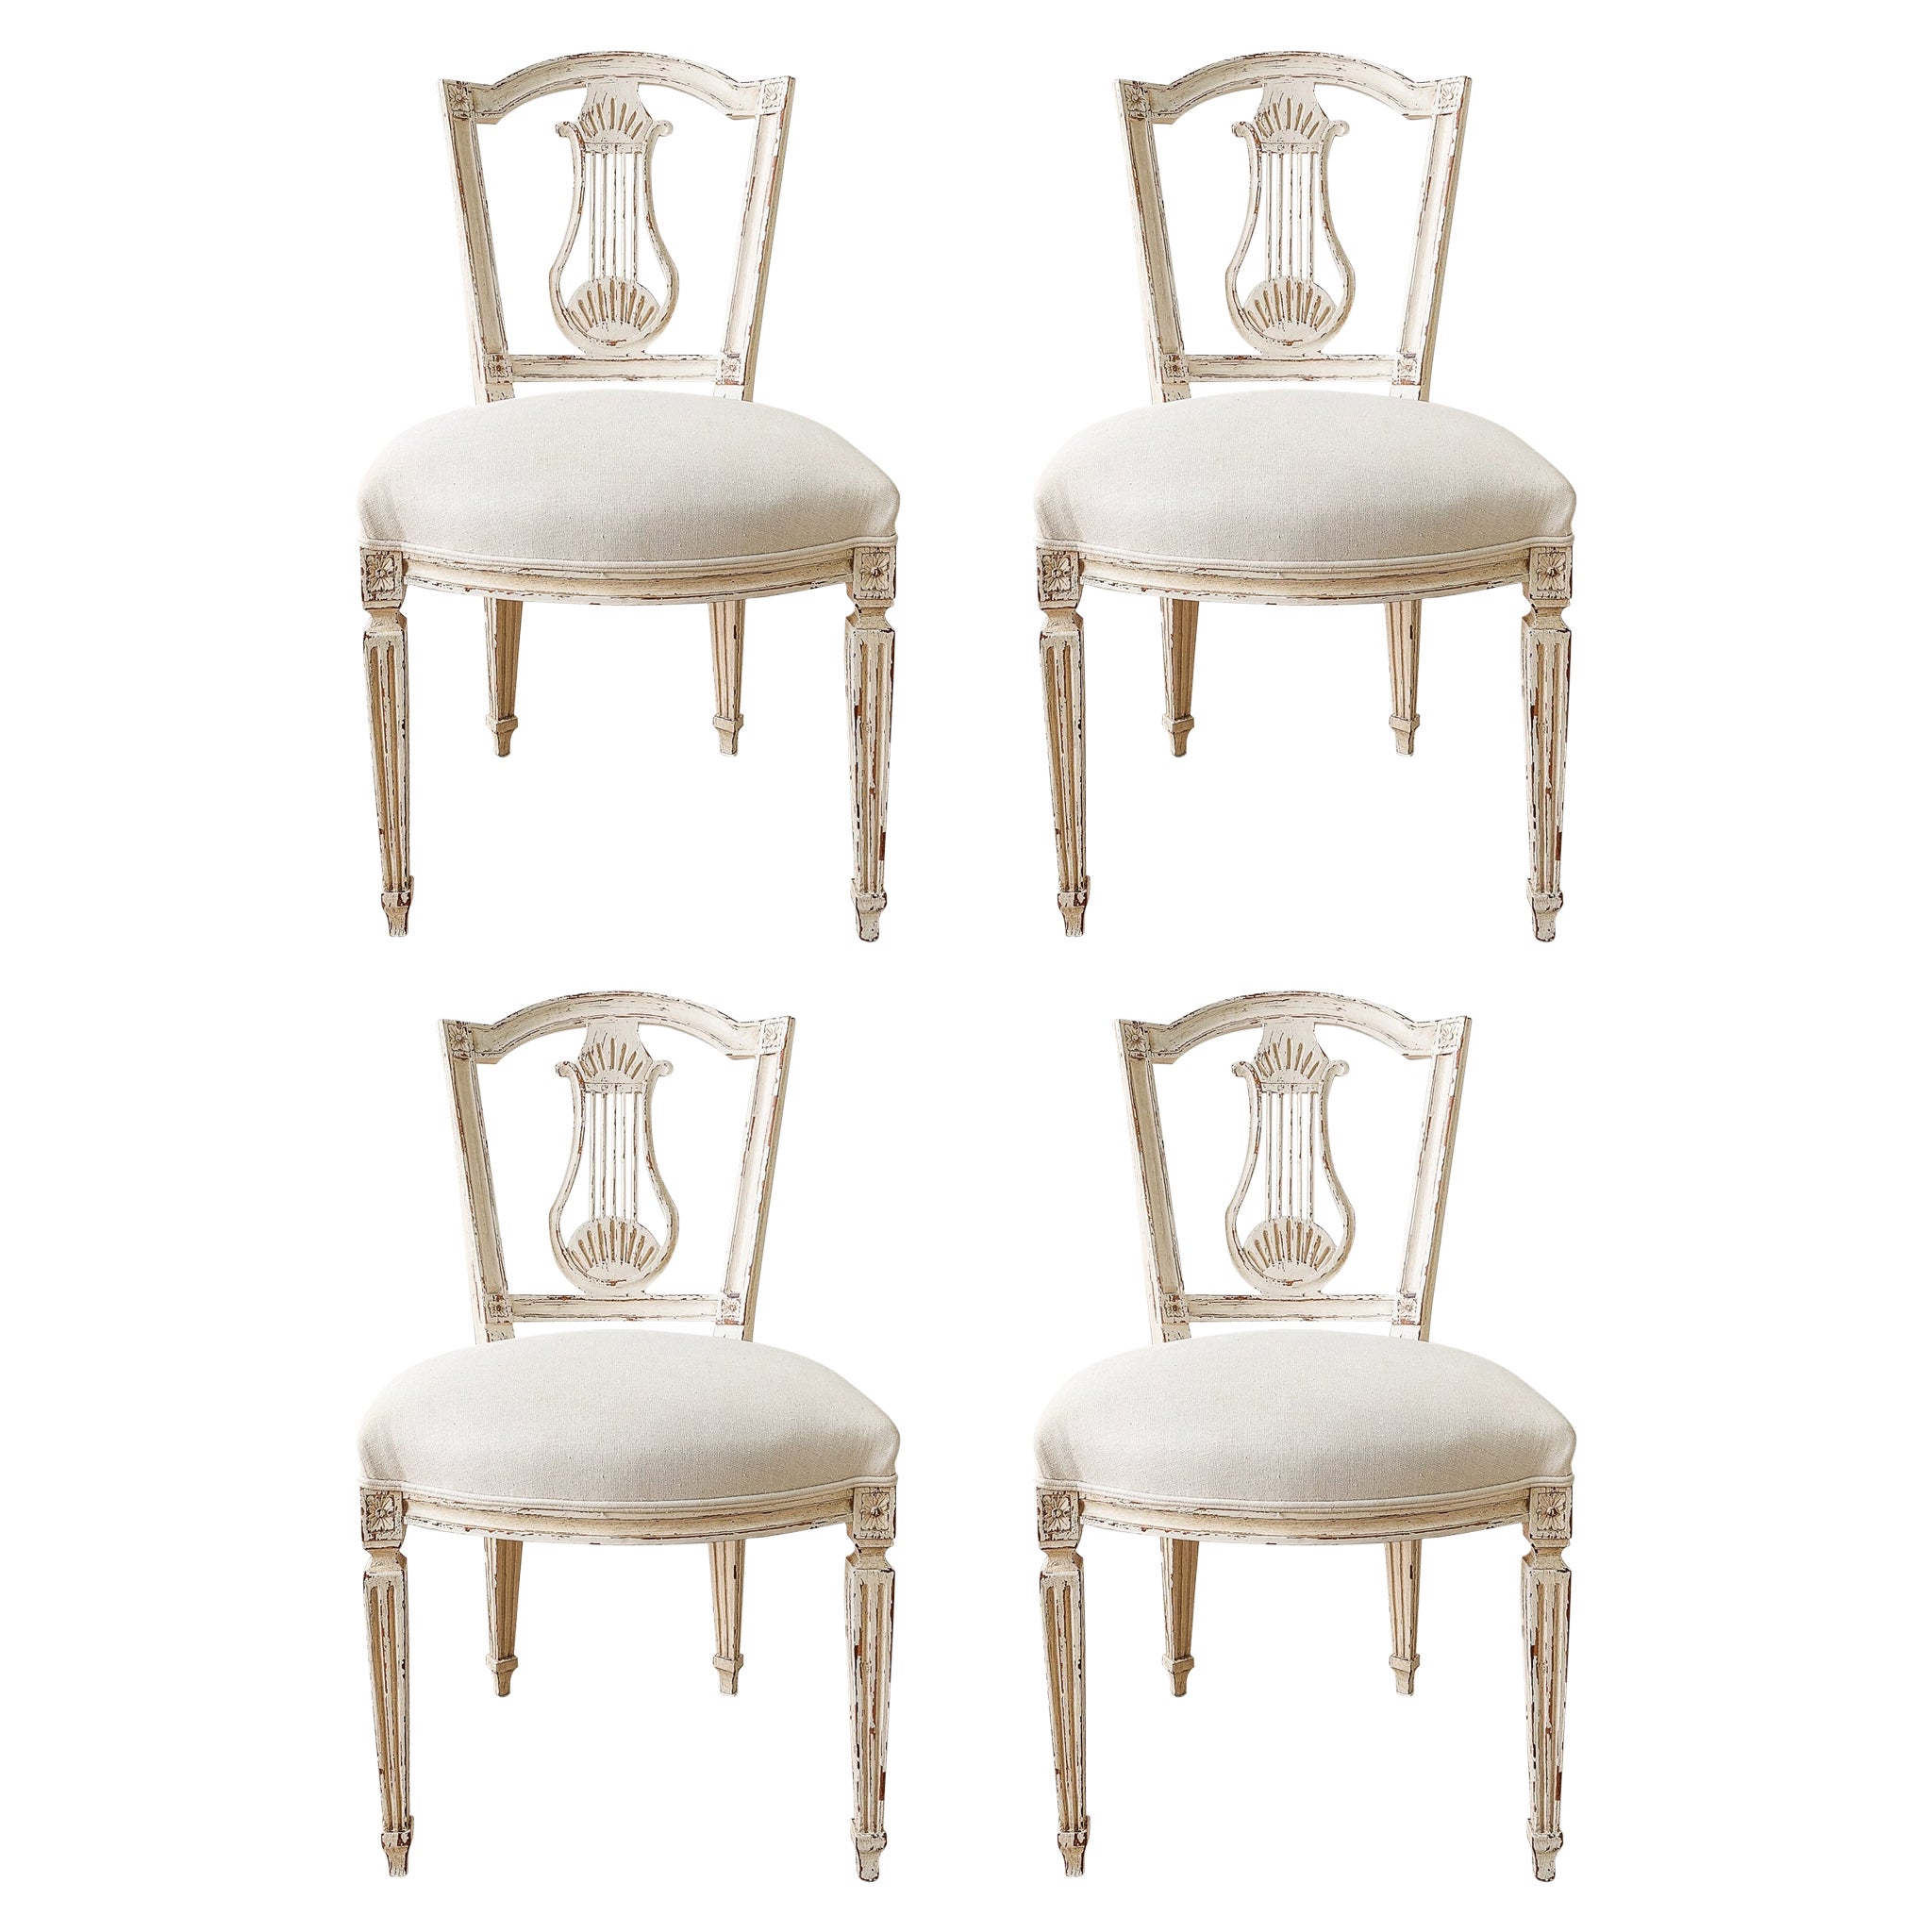 Set of 4 Antique French Louis XVI Dining Room Chairs with Harp Ornament